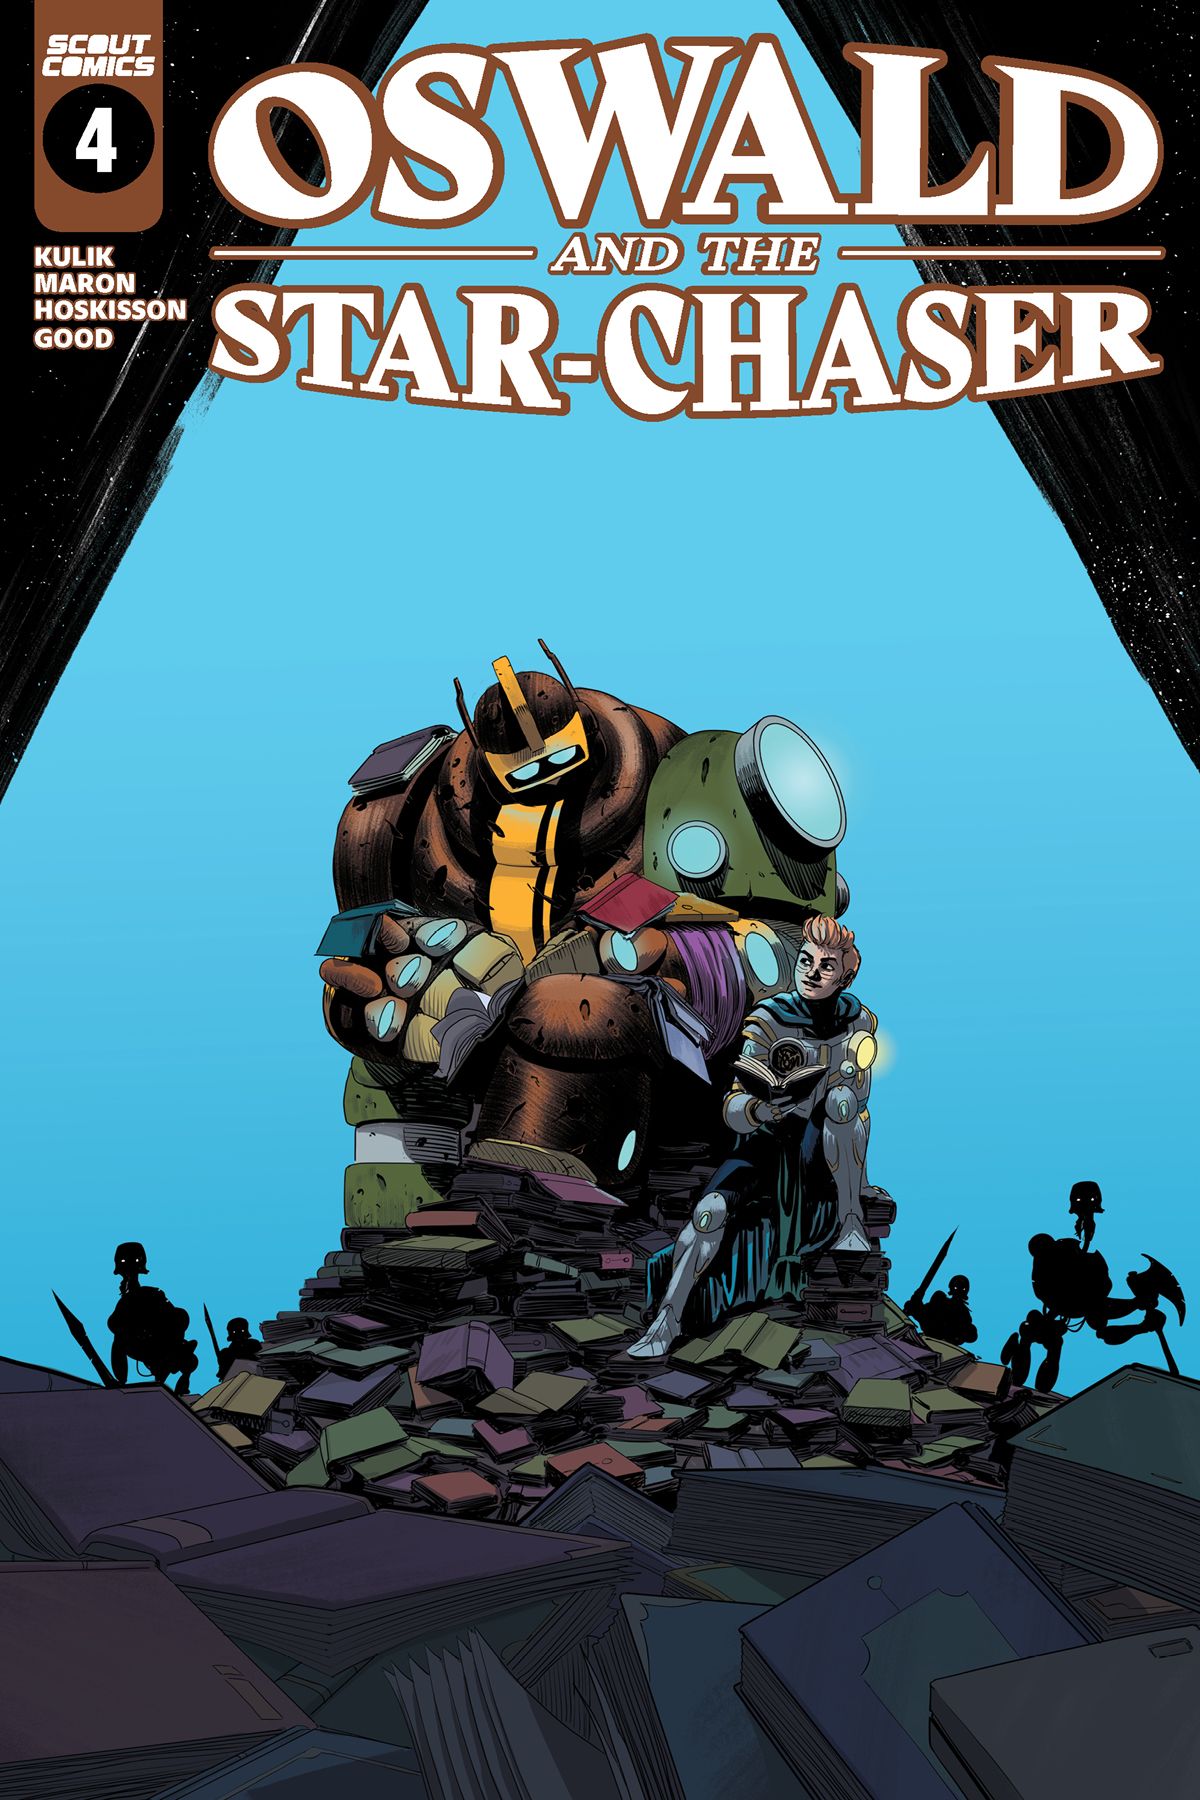 Oswald and the Star-Chaser #4 Comic